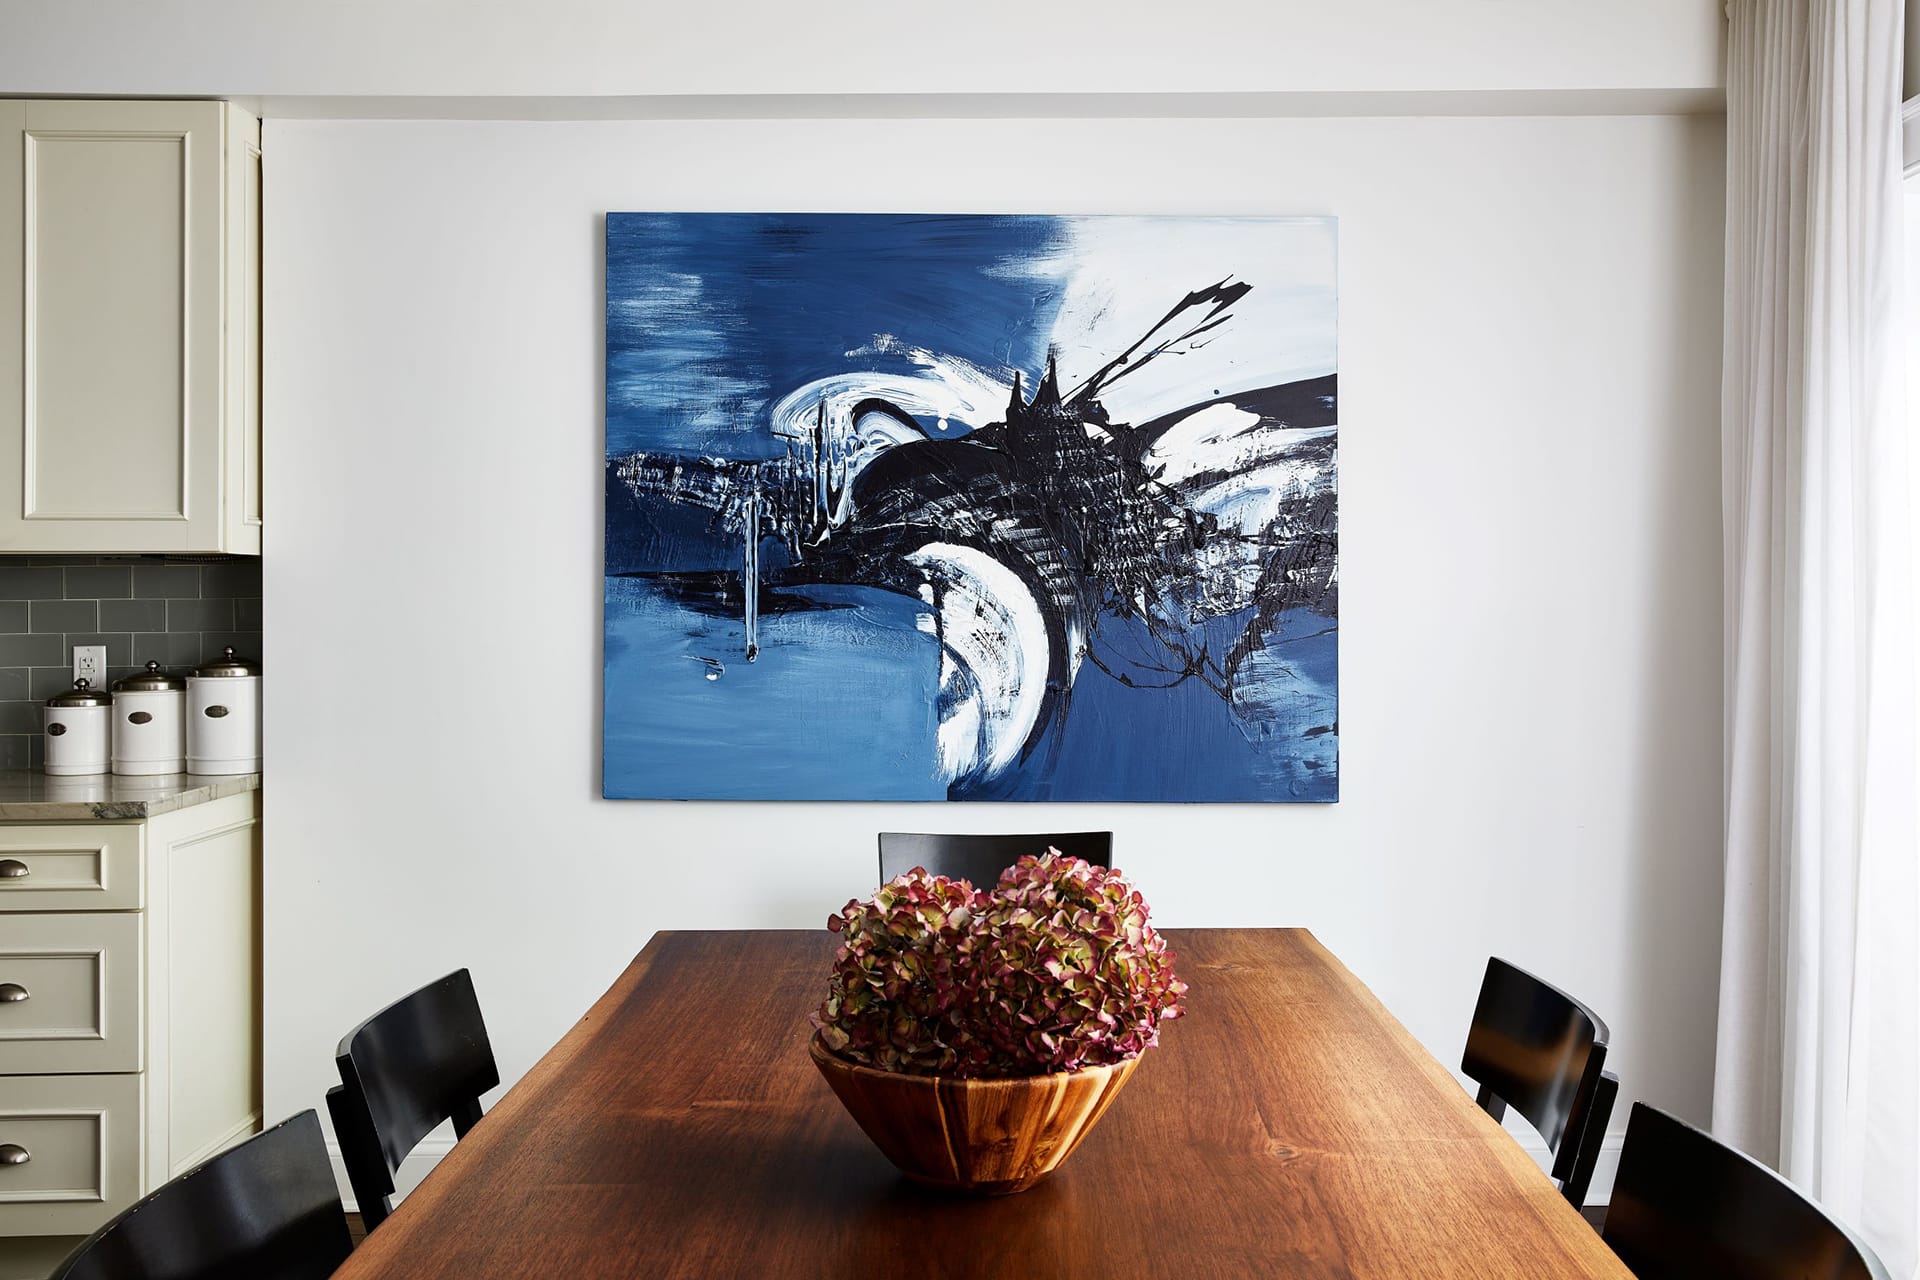 Dining area with a natural wood table and large blue painting on the wall.